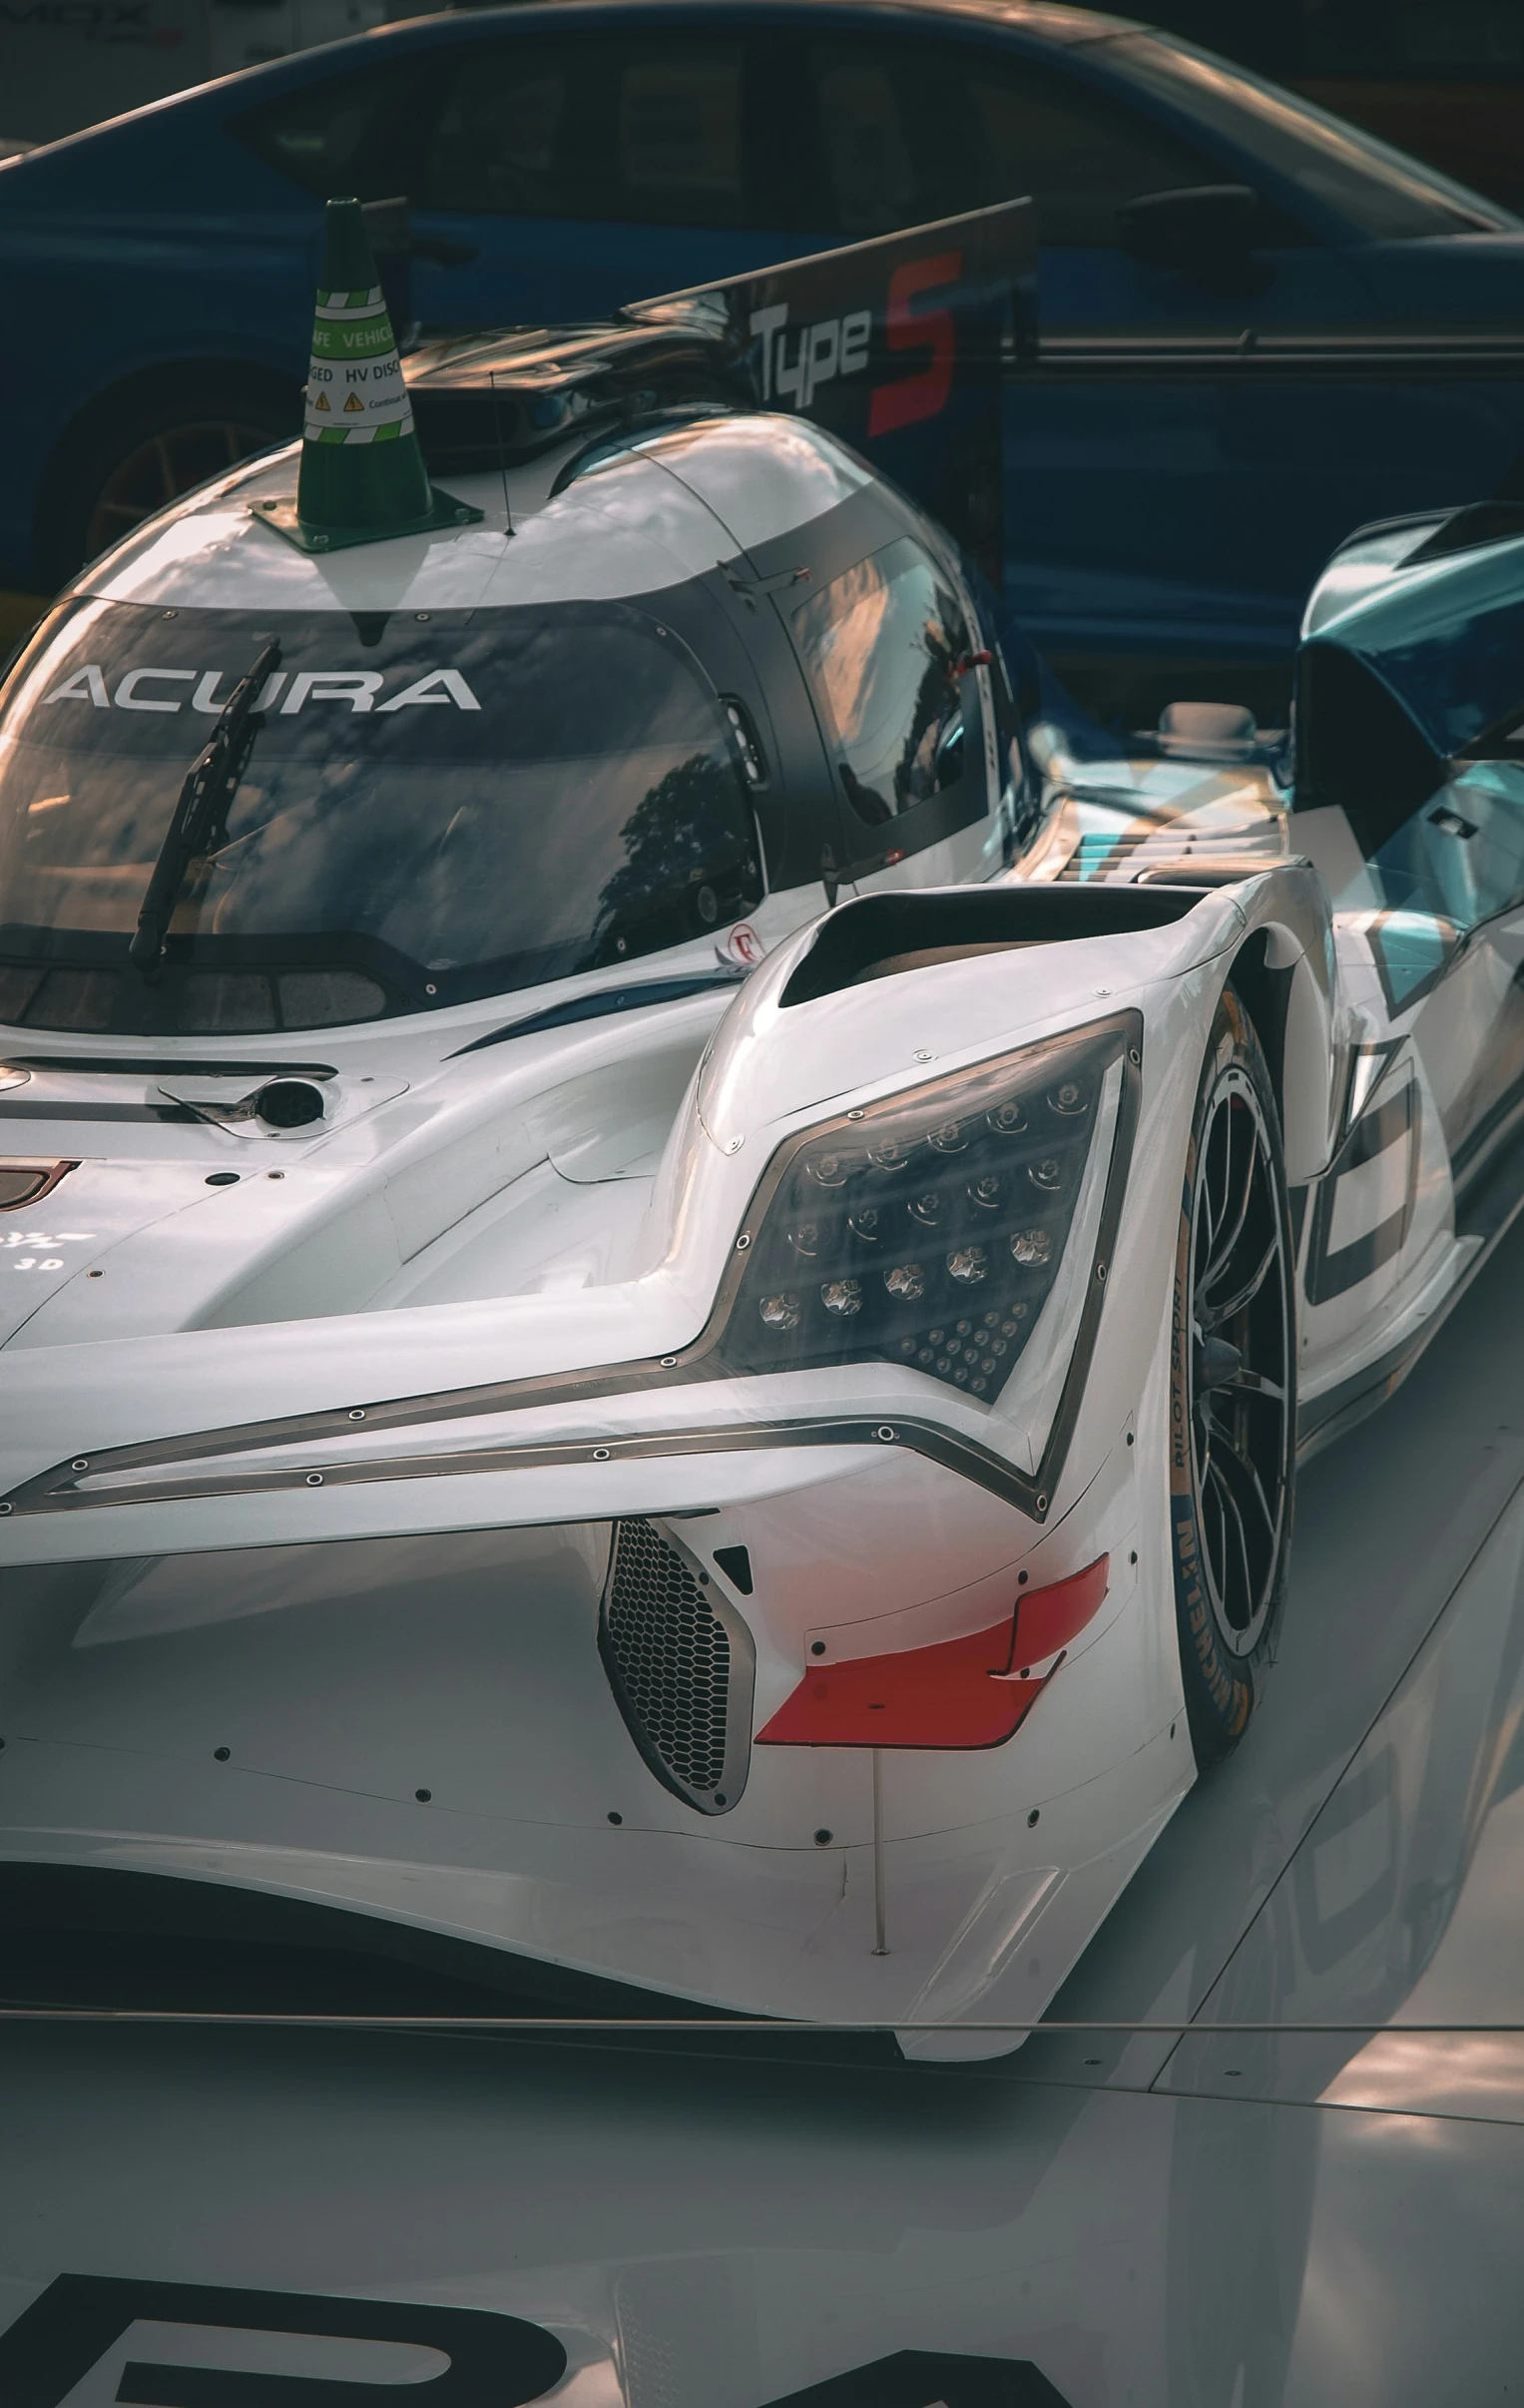 an image of the front end of a race car on display